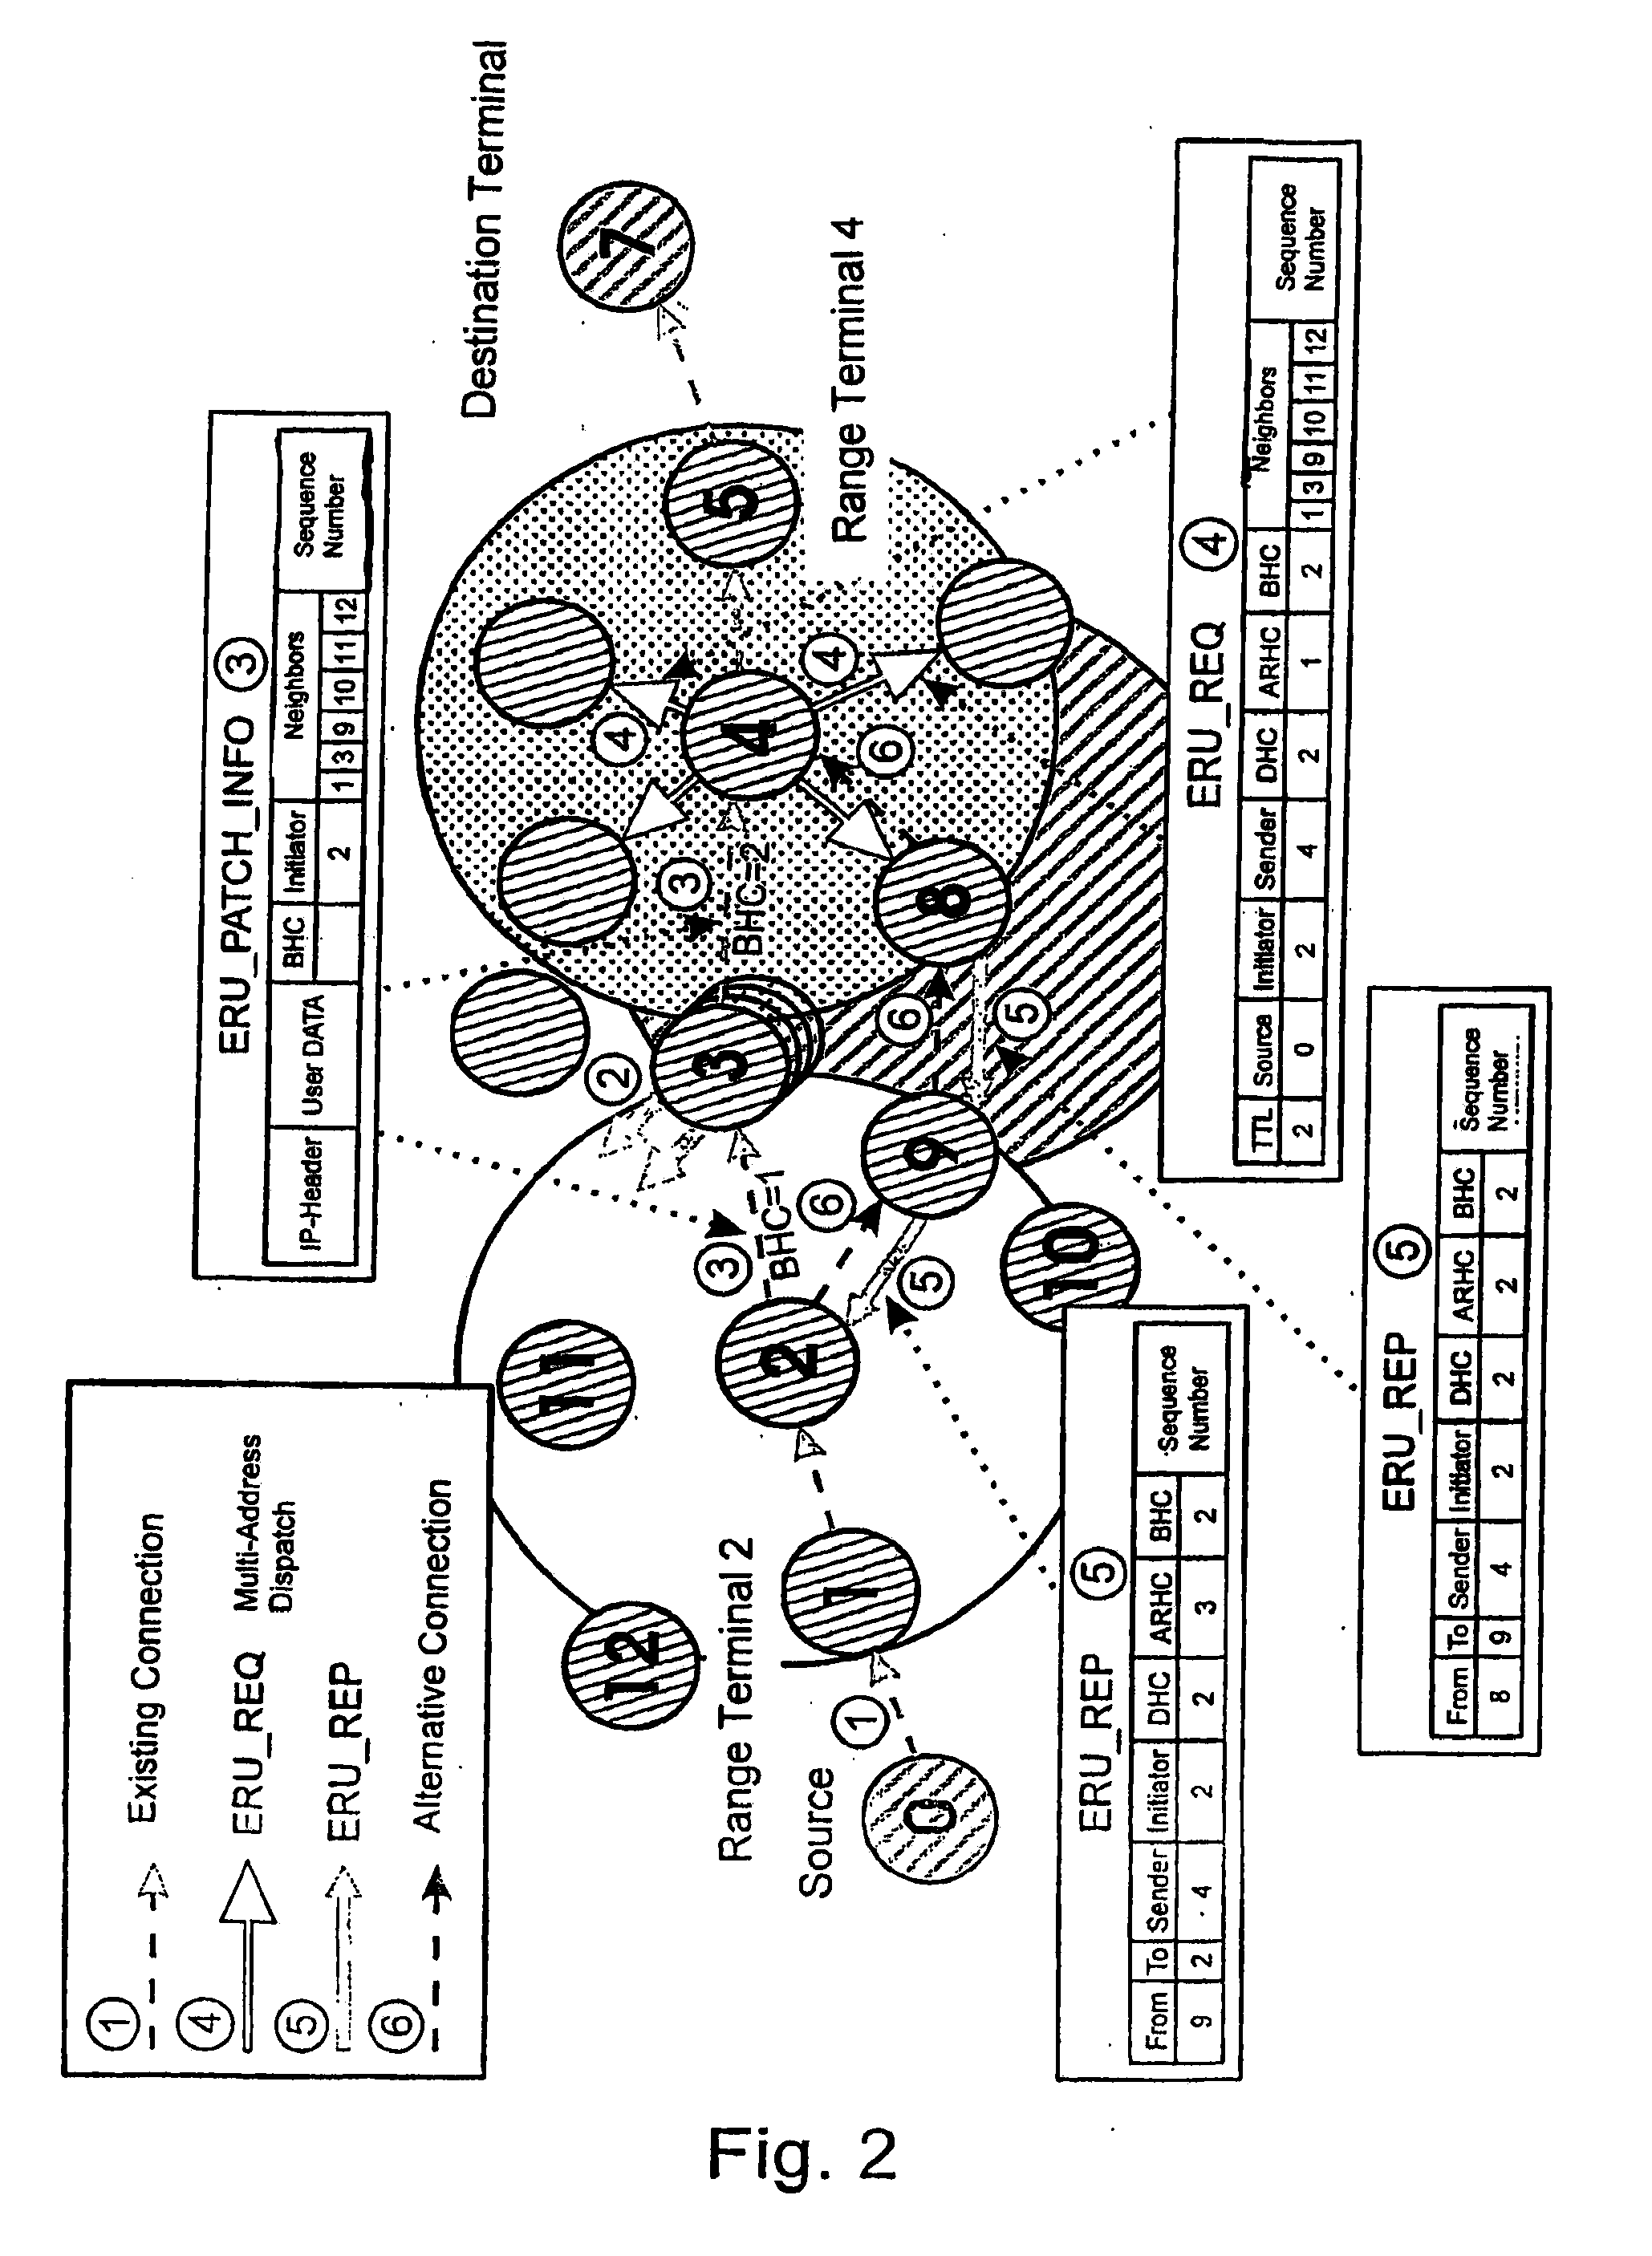 Method and device for controlling data connections in a data network having a plurality of data network nodes